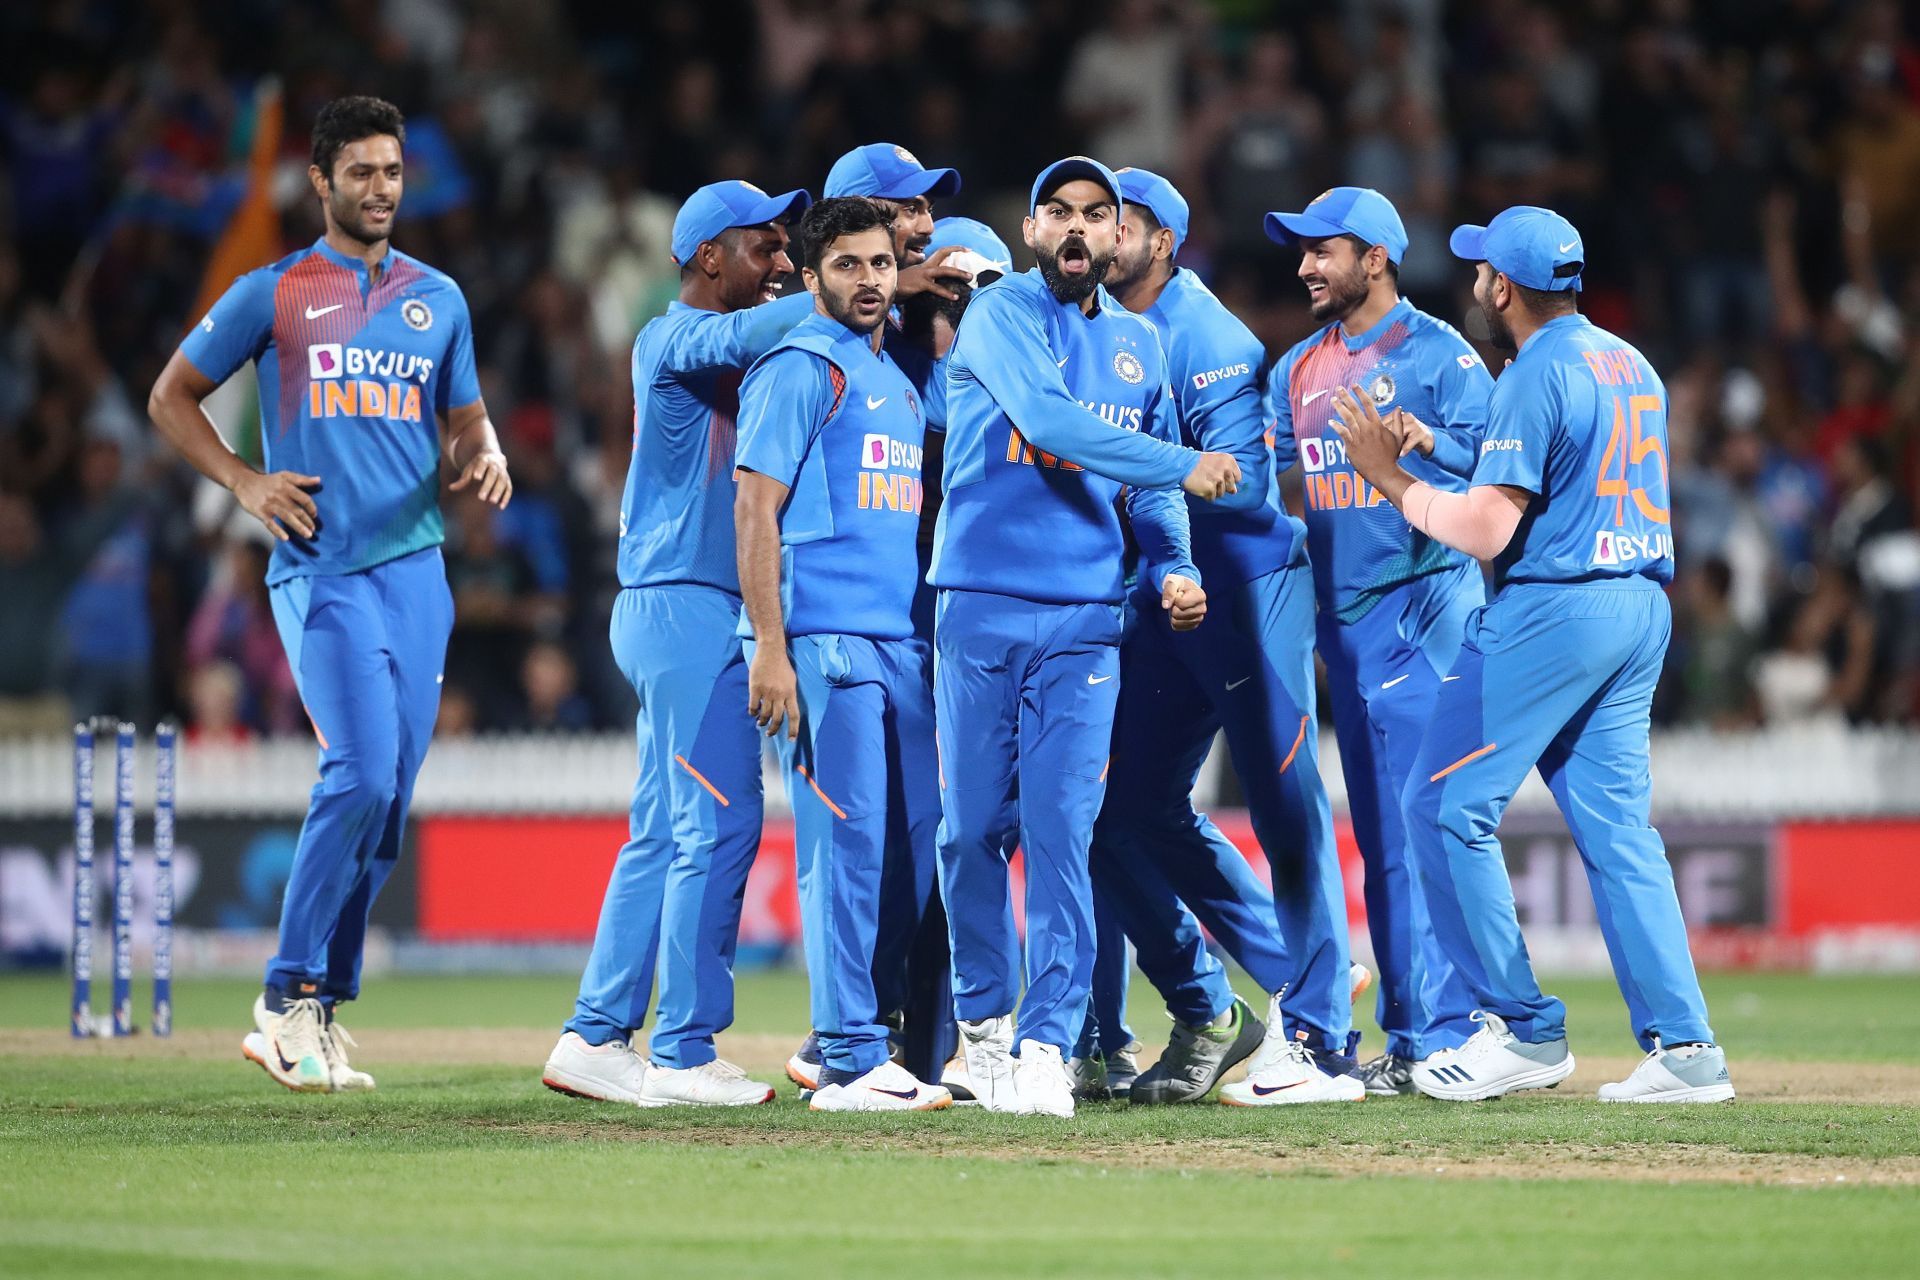 India won the Super Over in Hamilton to take an unassailable 3-0 lead in the series